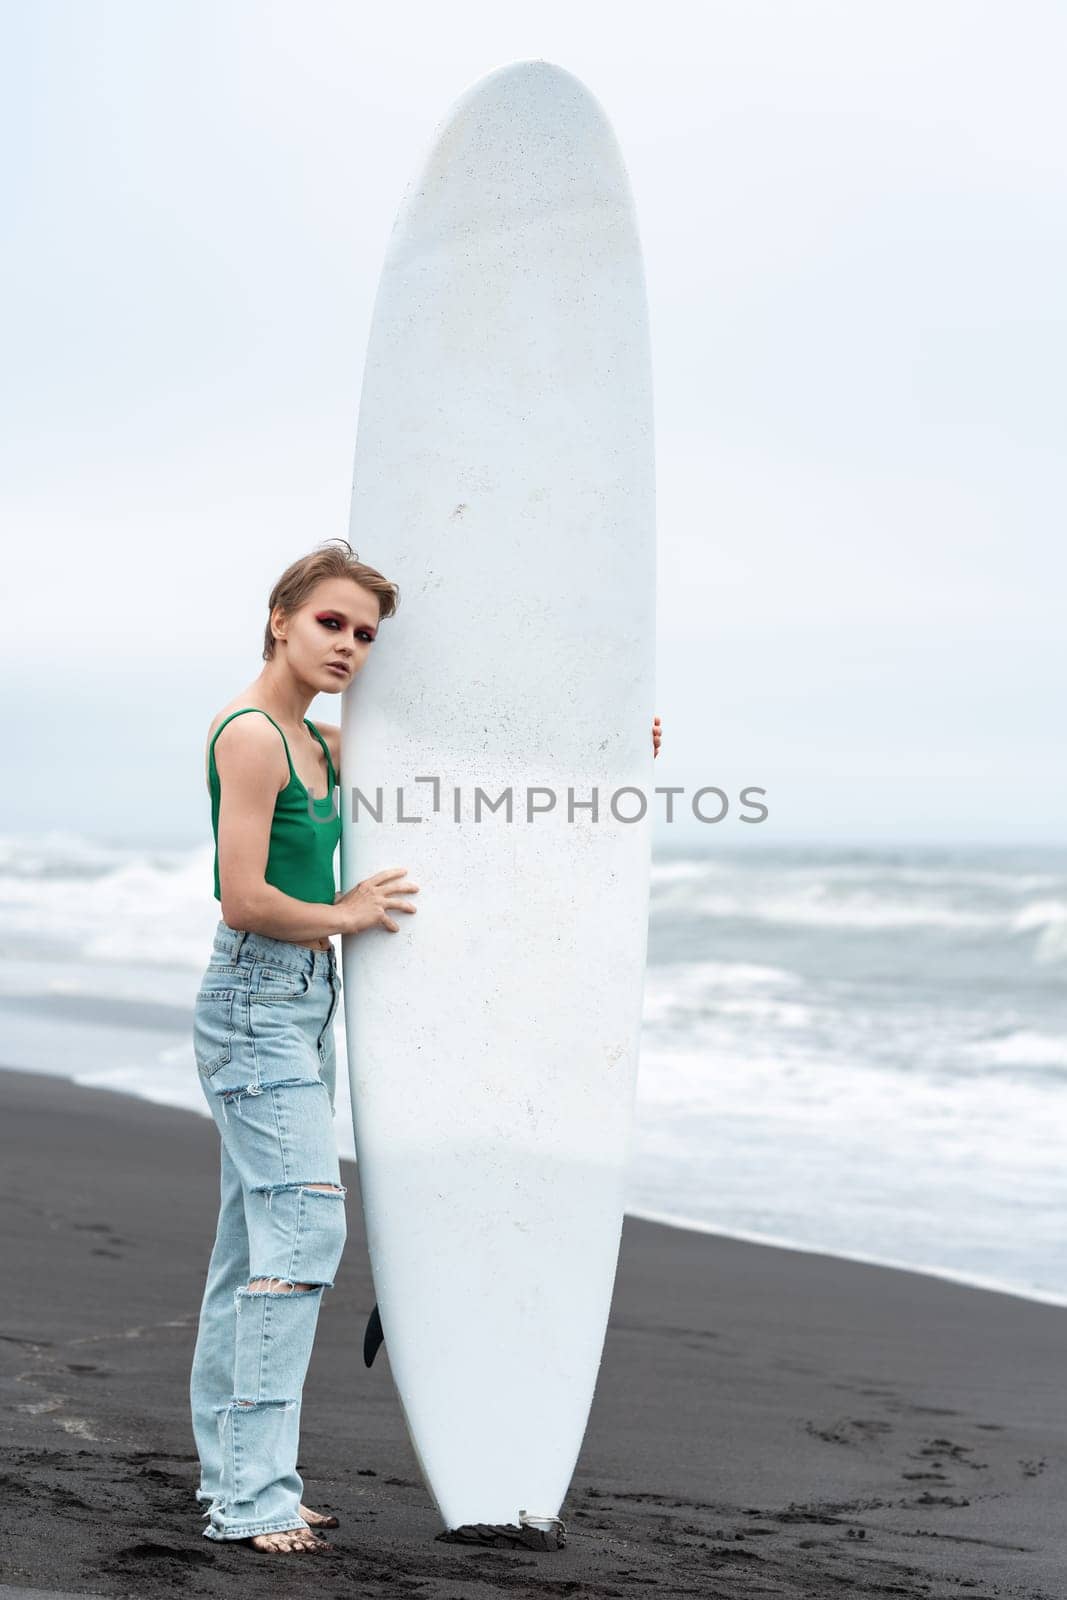 Woman surfer standing on beach, holding surfboard vertically. Fashion model looking at camera, posing against background of breaking ocean waves. Woman wearing casual clothing green top and blue jeans